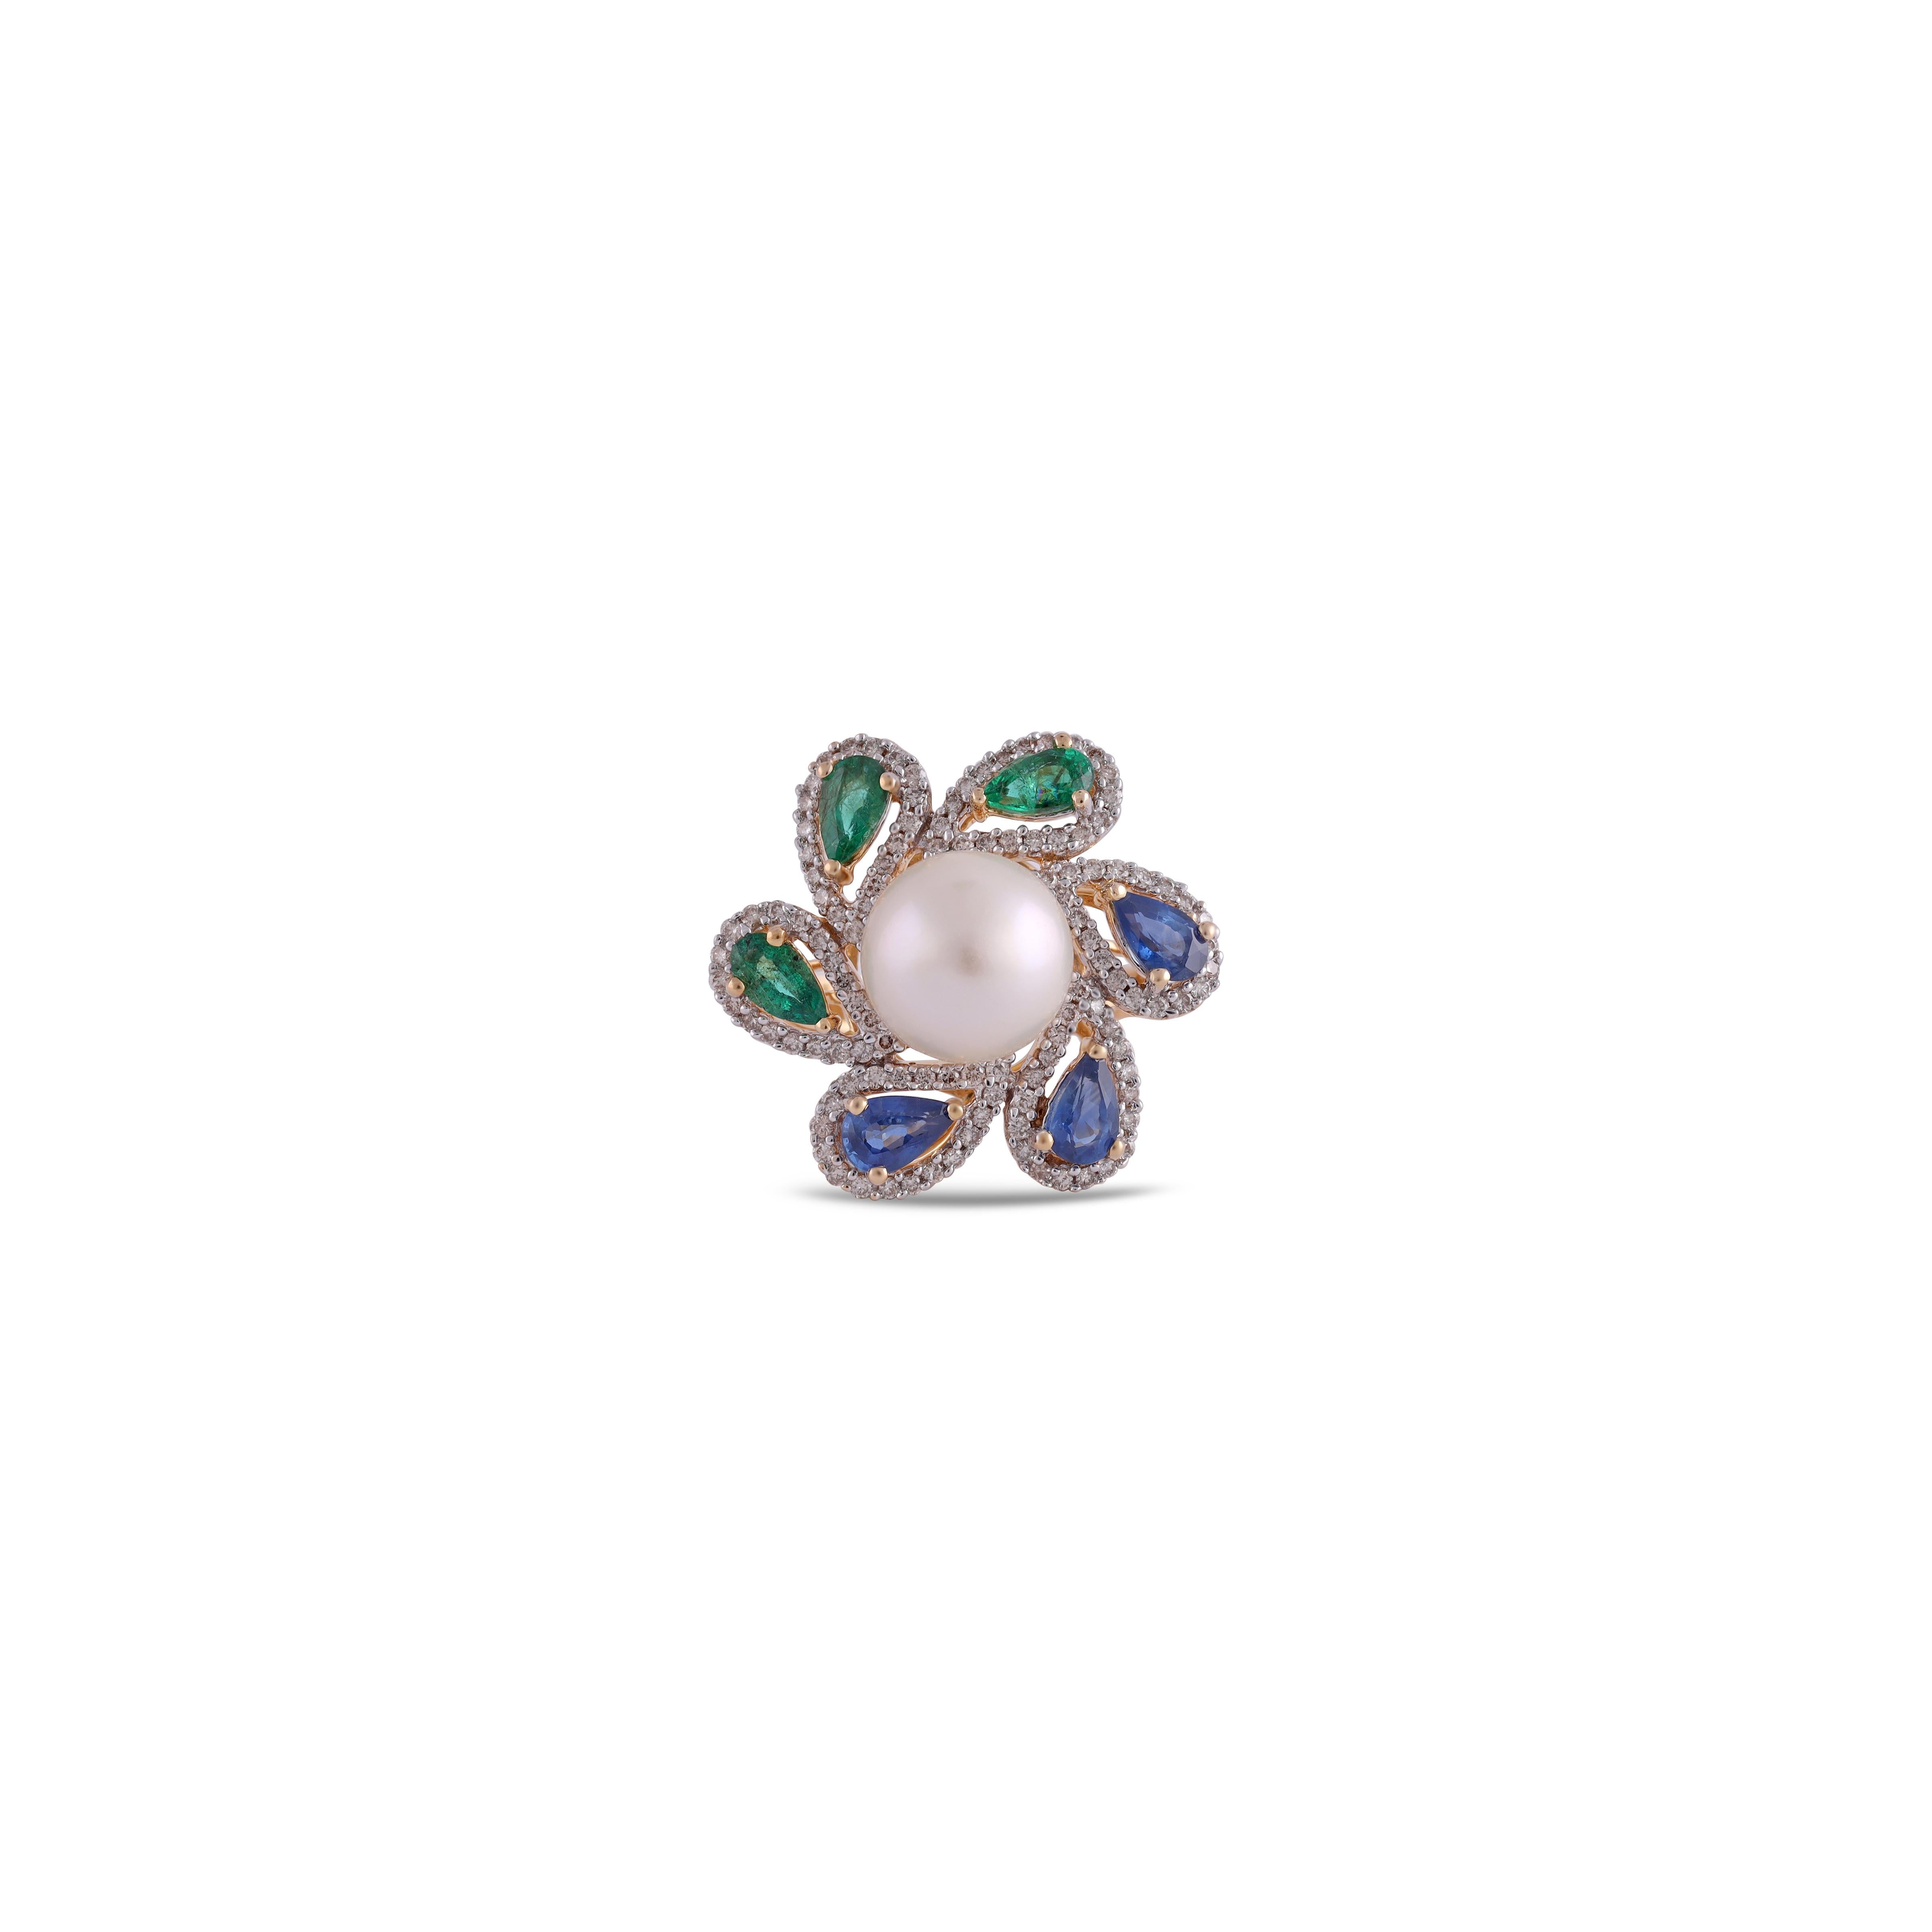 This is an elegant emerald, Sapphire, Pearl & diamond ring studded in 18k gold with 3 piece of  emerald weight 0.51 Carat, 3 piece of Sapphire 0.76 carat,  1 piece of Pearl 3.52 Carat. which is surrounded of 114 mix shaped diamonds weight 0.43 carat